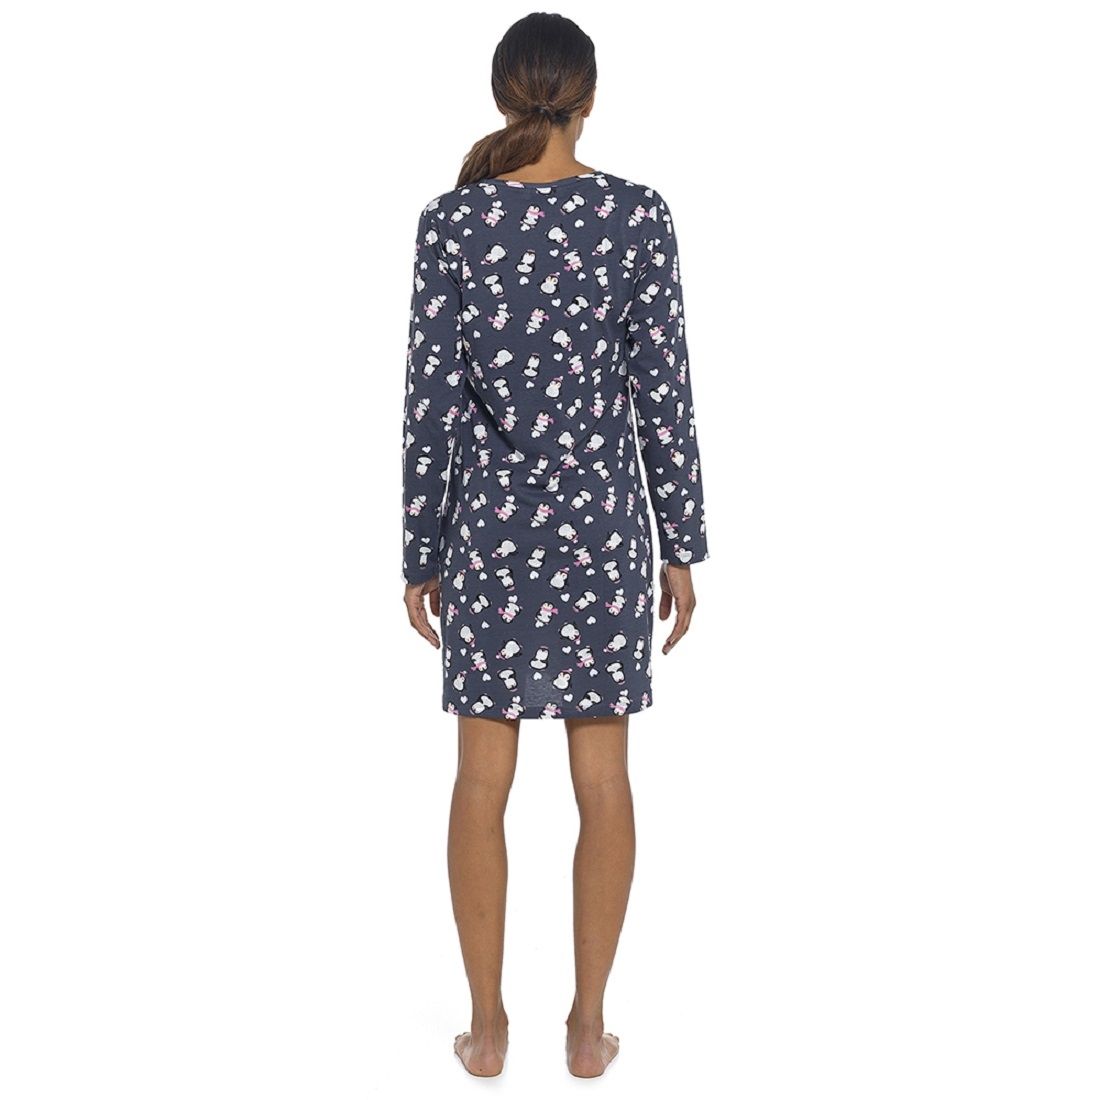 Ladies All Over Penguin Print Long Sleeve Nightdress - S-XL